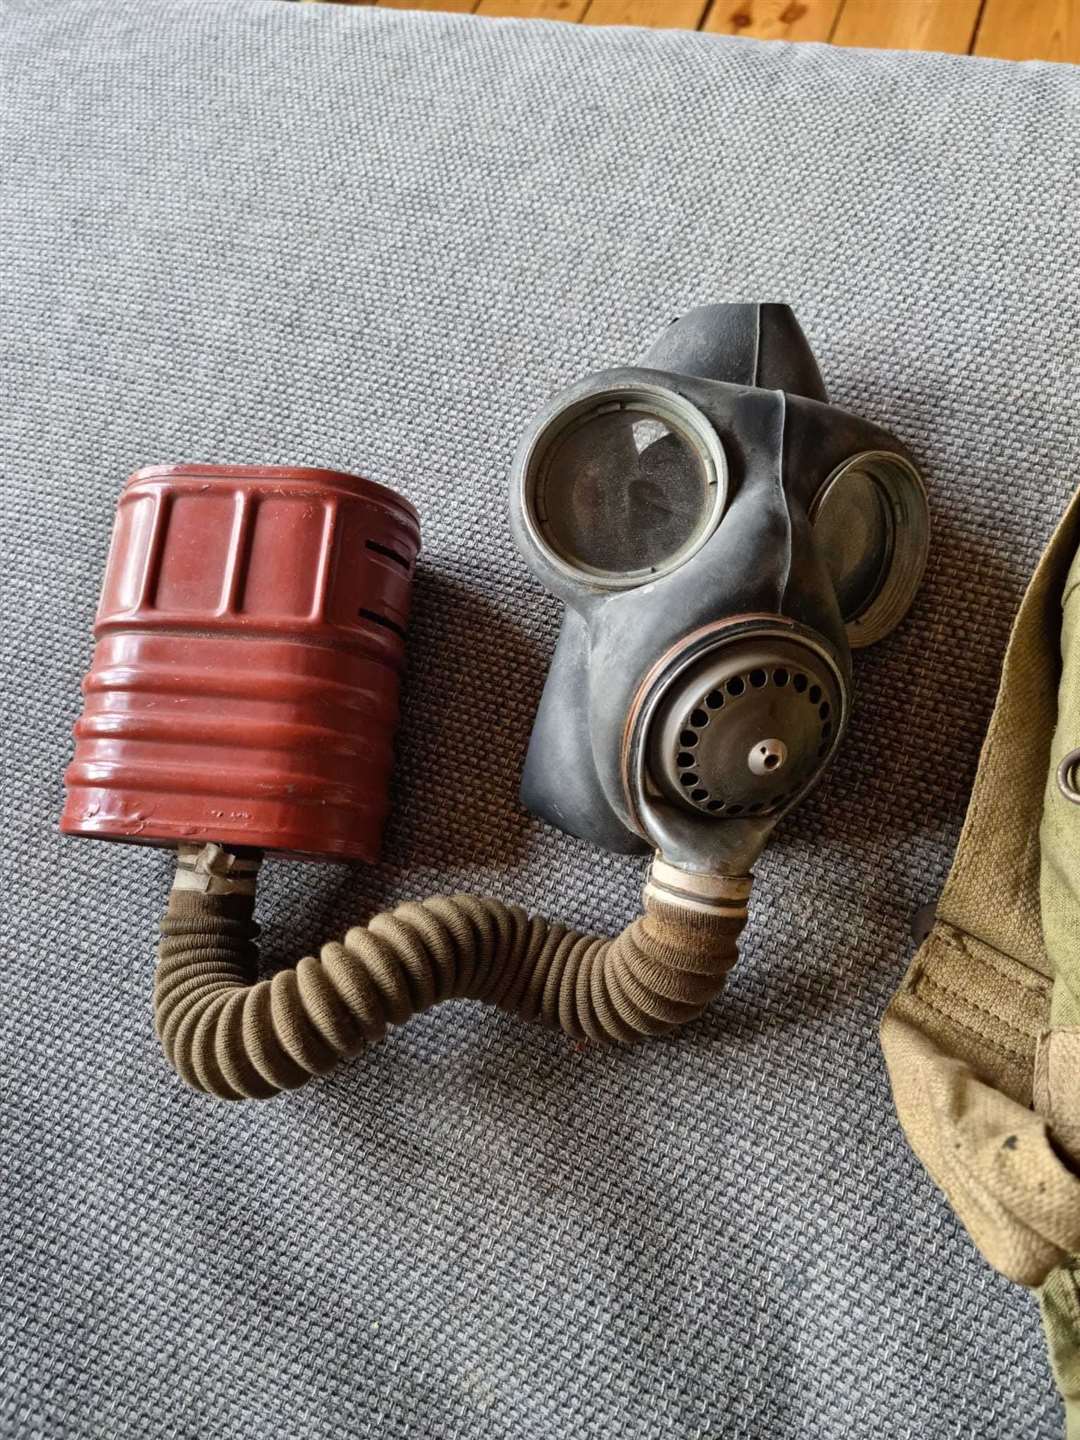 The Second World War gas mask and items found in the loft by Shayne MacDonald.